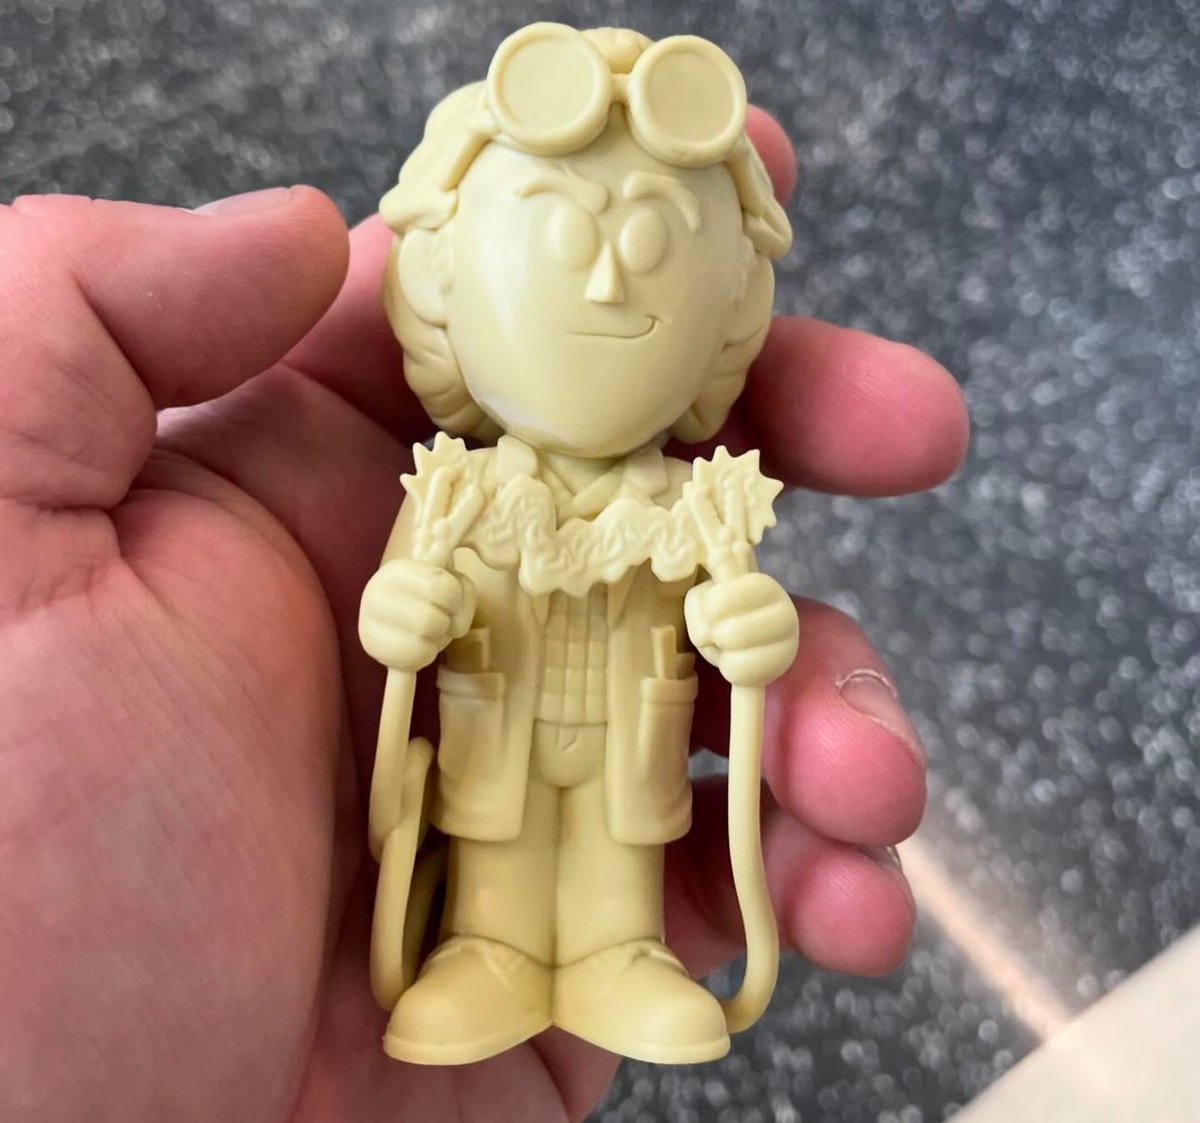 First look at the proto of an unreleased Doc Brown Soda! I wonder if they’ll release it. 🤔 . Credit @johnnyfunko575 #Funko #FunkoPop #FunkoPopVinyl #Pop #PopVinyl #Collectibles #Collectible #FunkoCollector #FunkoPops #Collector #Toy #Toys #DisTrackers